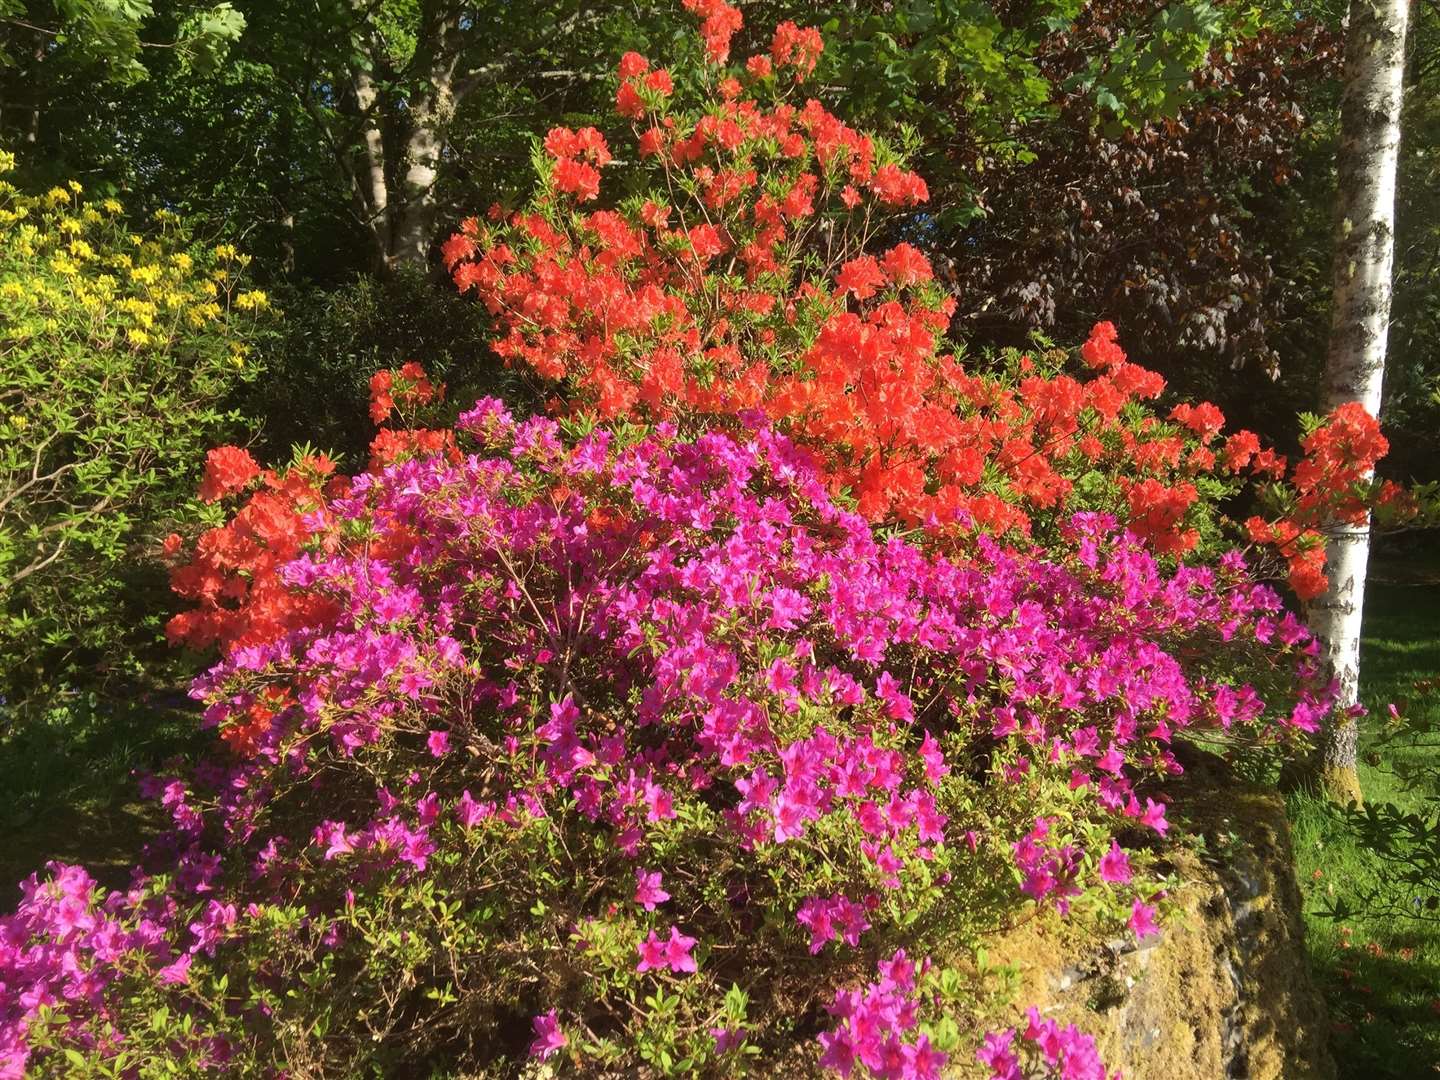 Attadale Gardens showcases its collection of rhododendrons as part of the Scottish Rhododendron Festival.